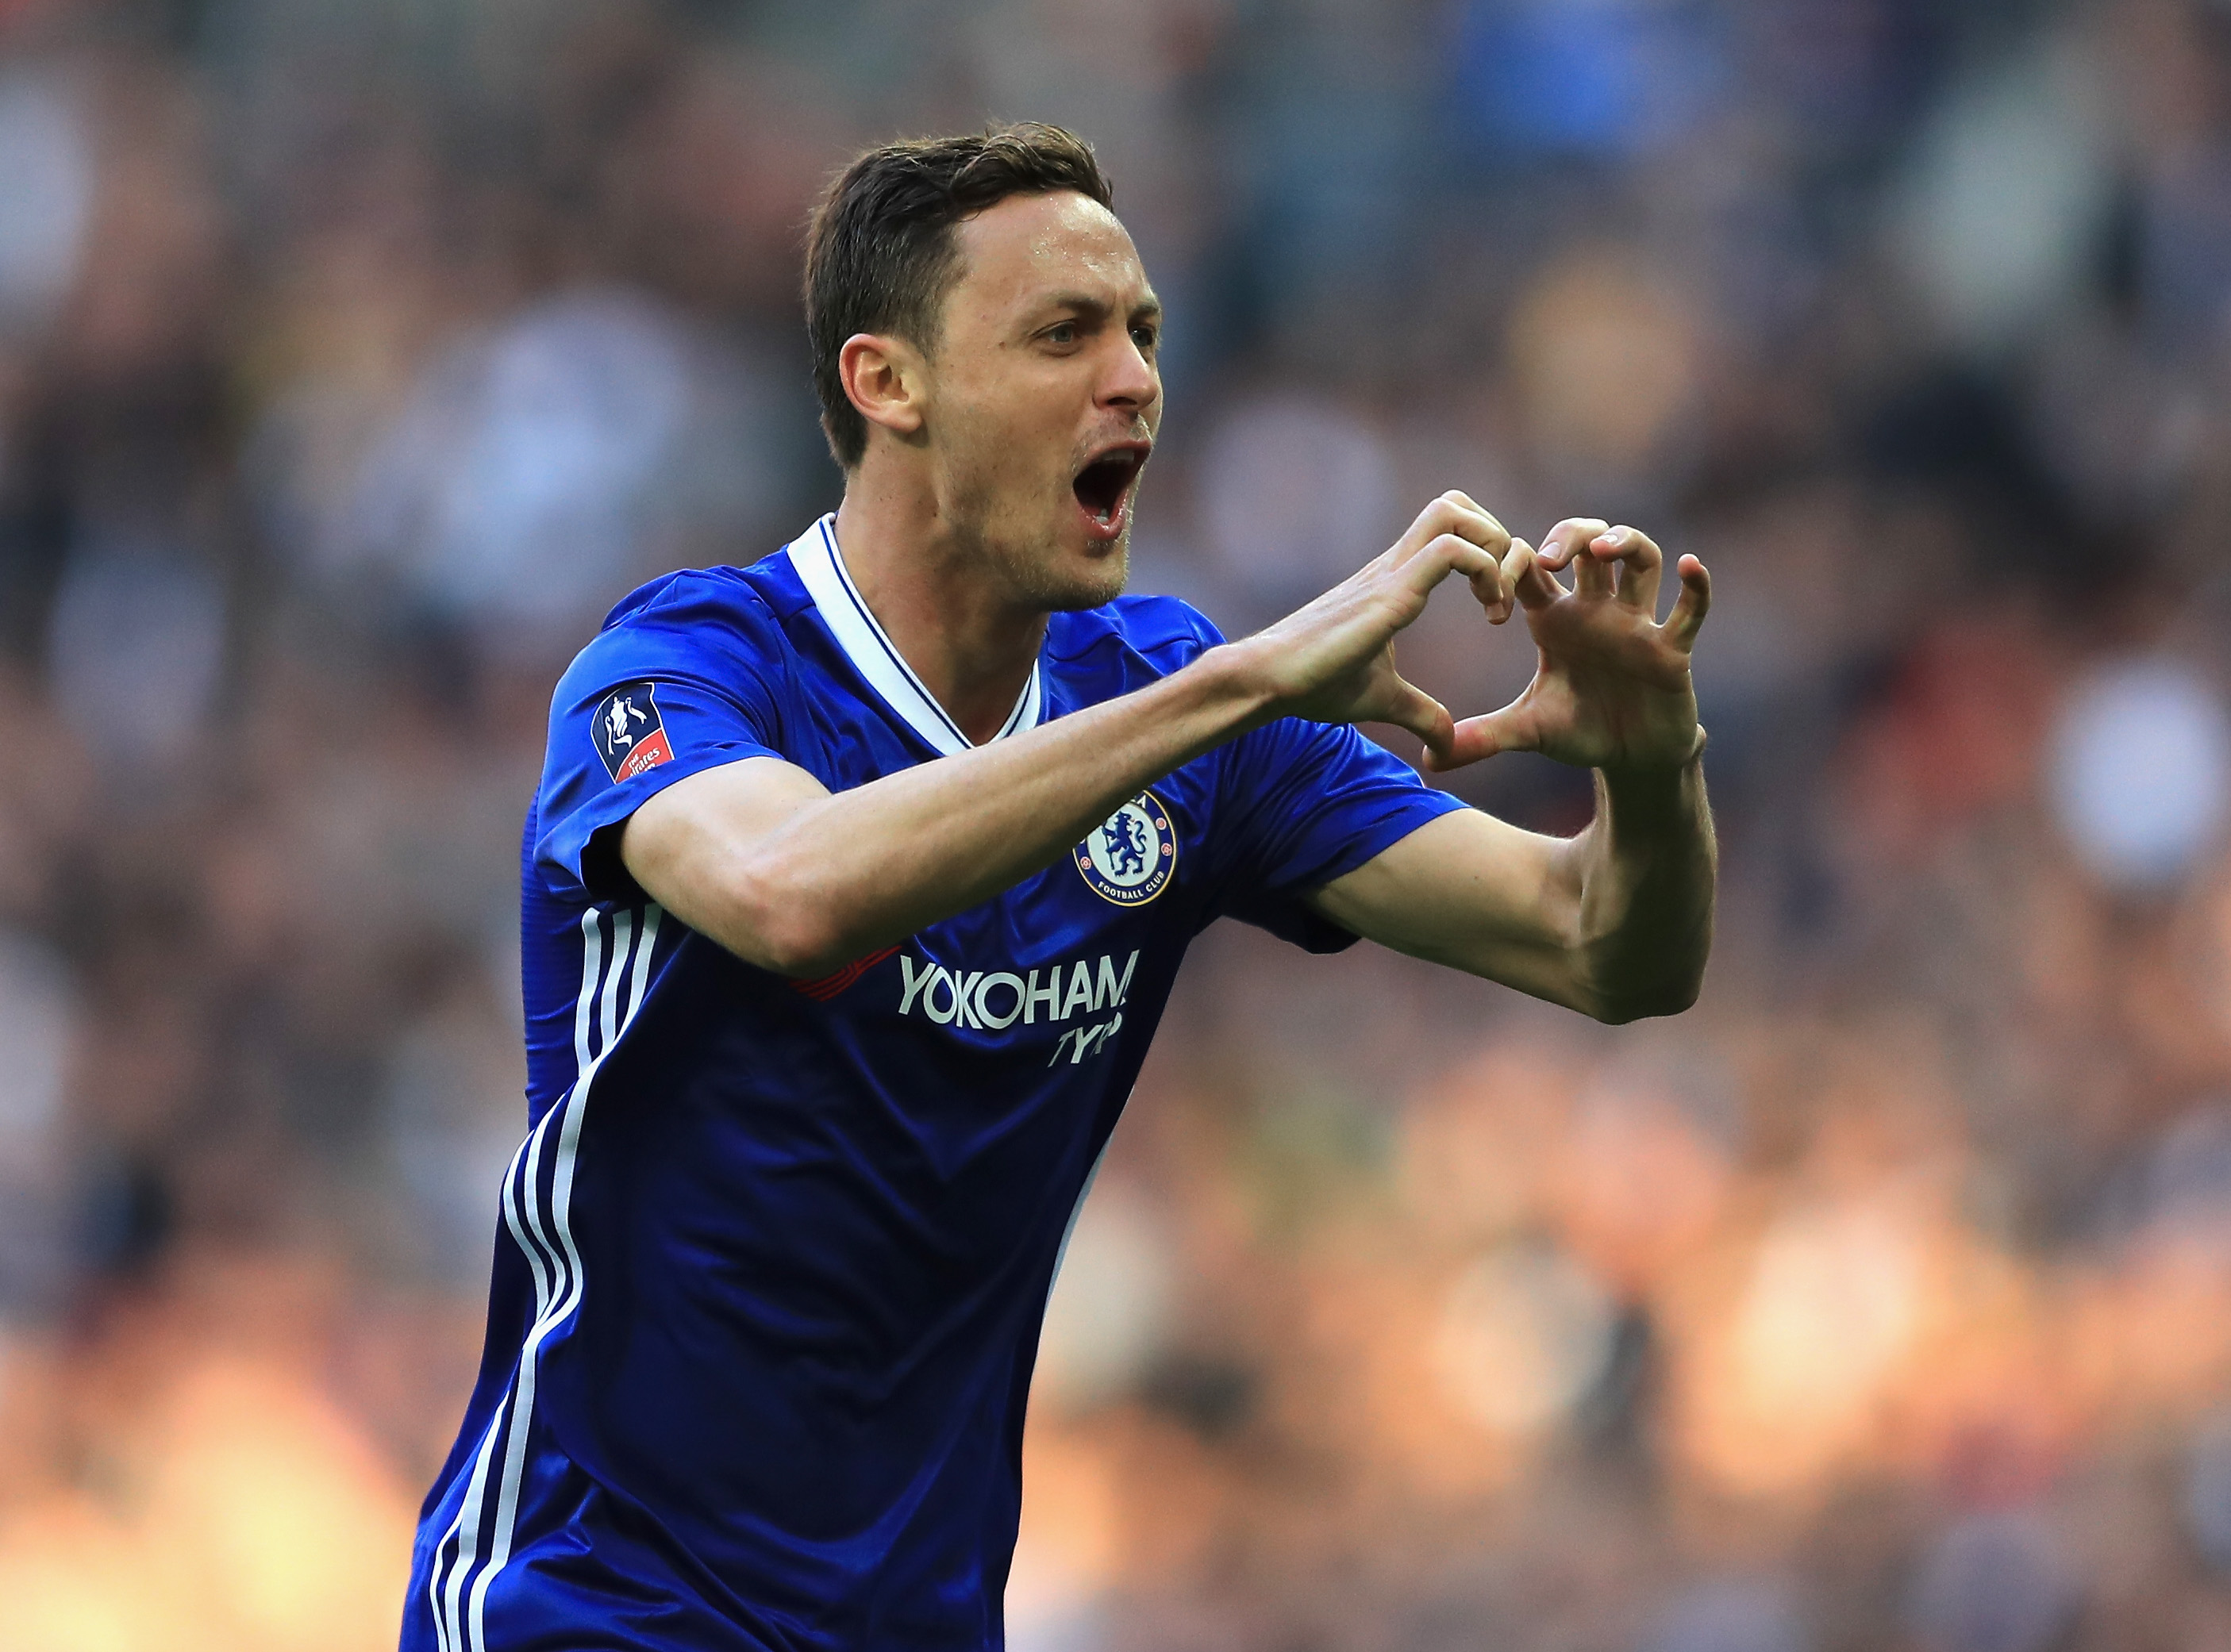 LONDON, ENGLAND - APRIL 22:  Nemanja Matic of Chelsea celebrates scoring his sides fourth goal  during The Emirates FA Cup Semi-Final between Chelsea and Tottenham Hotspur at Wembley Stadium on April 22, 2017 in London, England.  (Photo by Richard Heathcote/Getty Images)